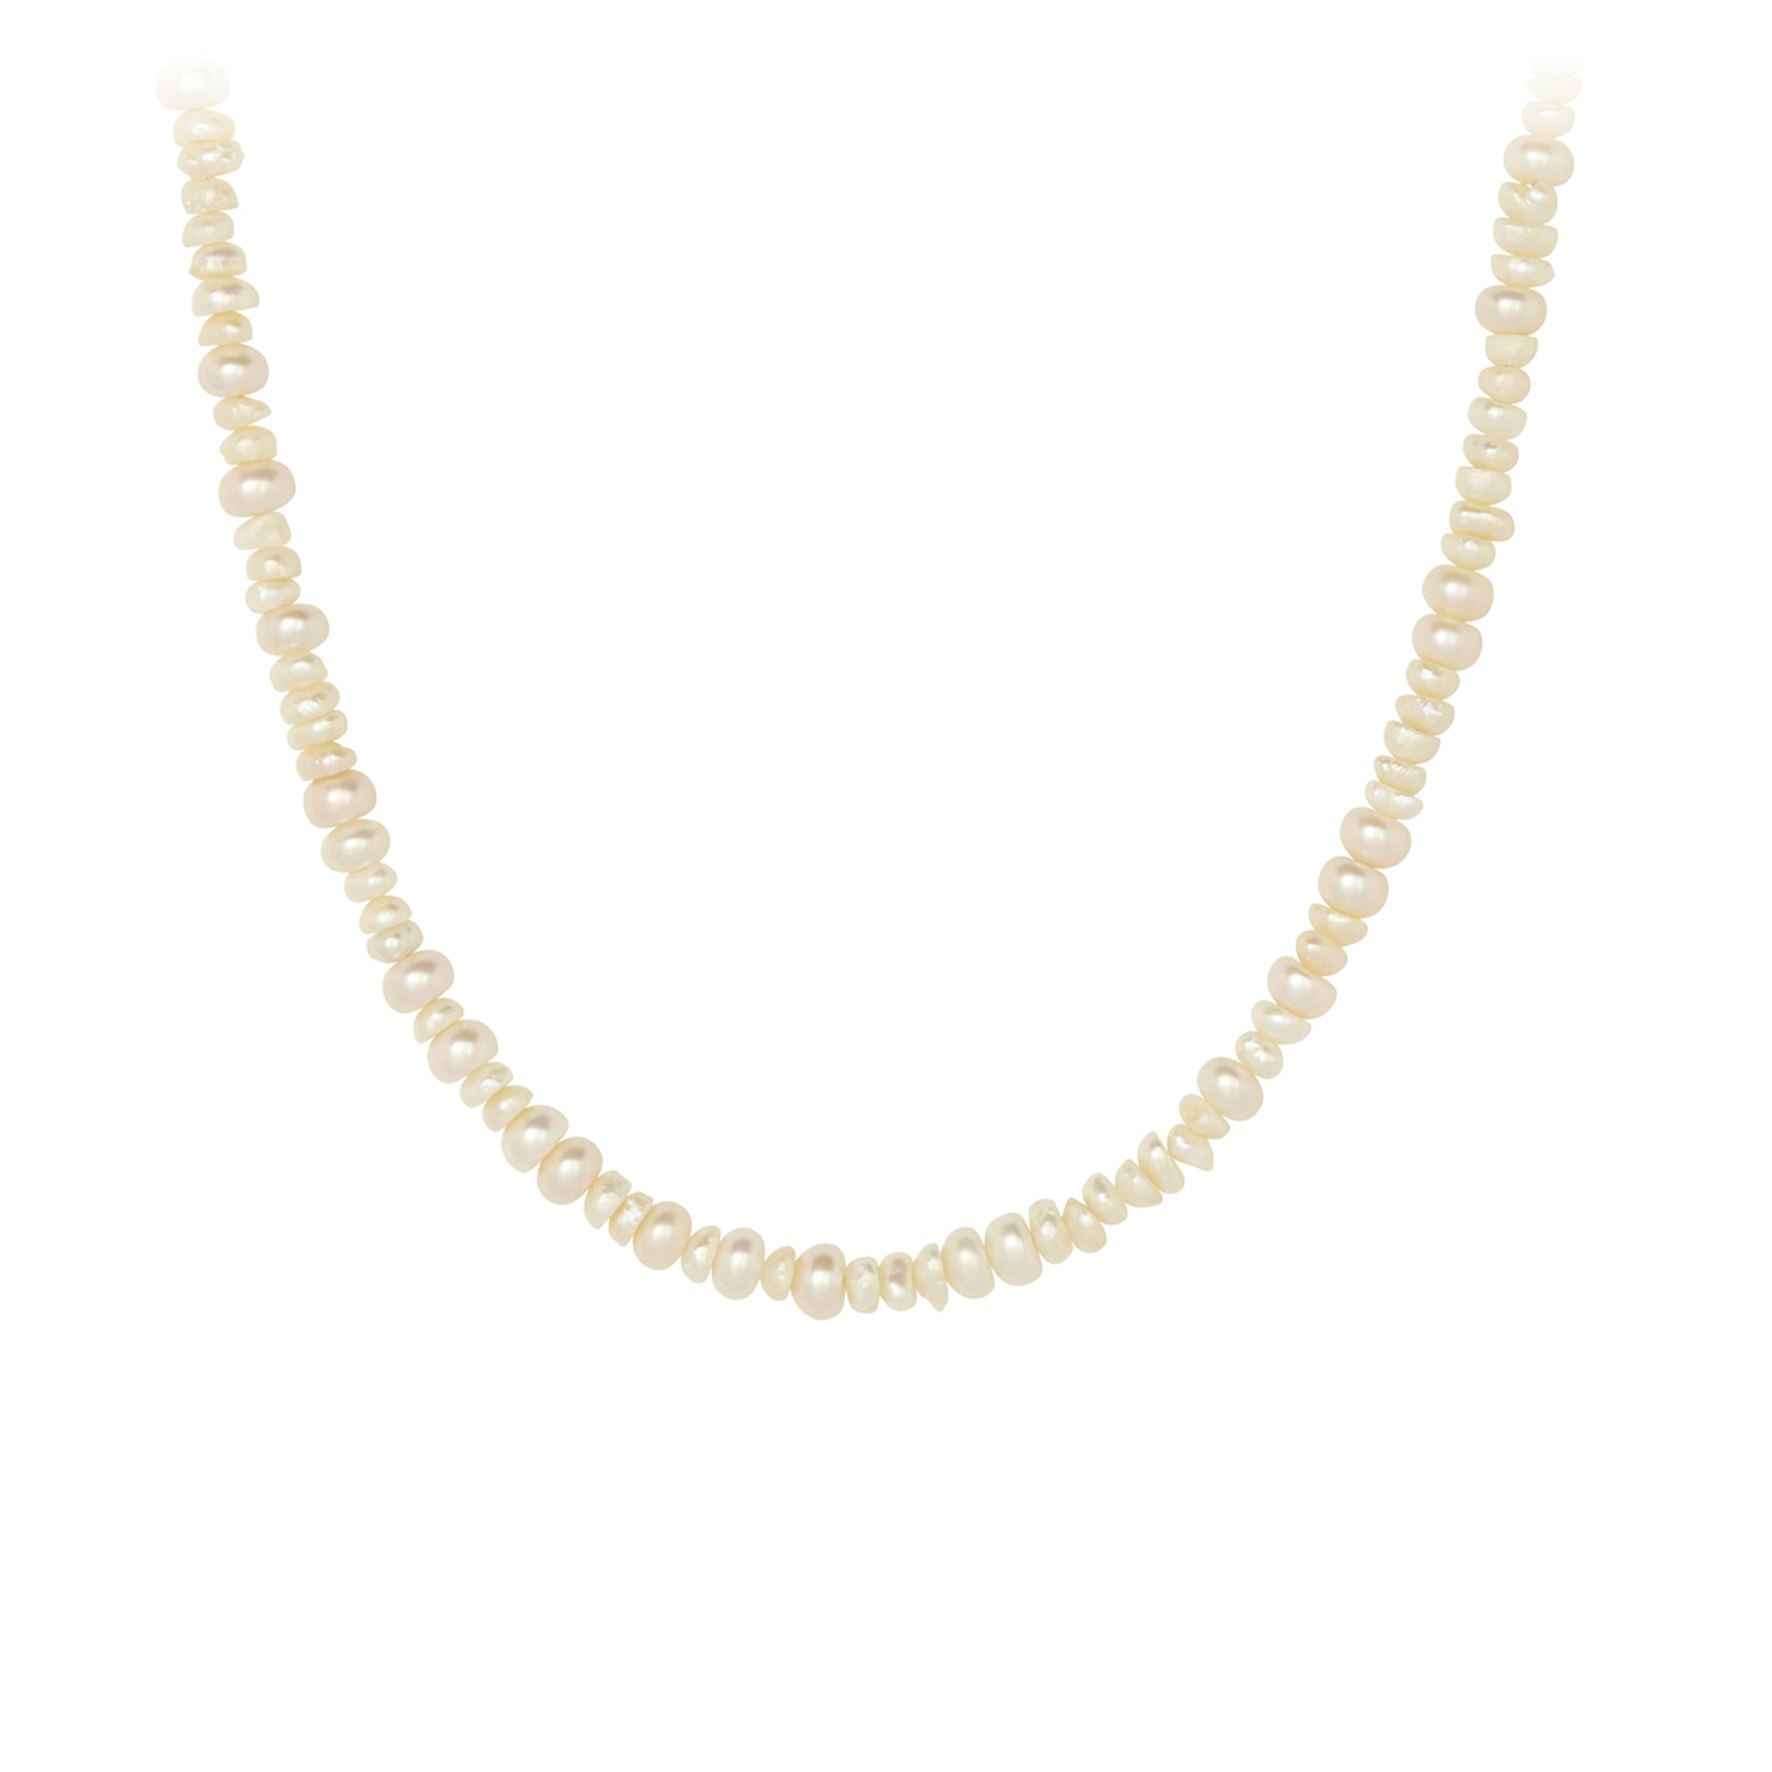 Liberty Necklace from Pernille Corydon in Goldplated Silver Sterling 925